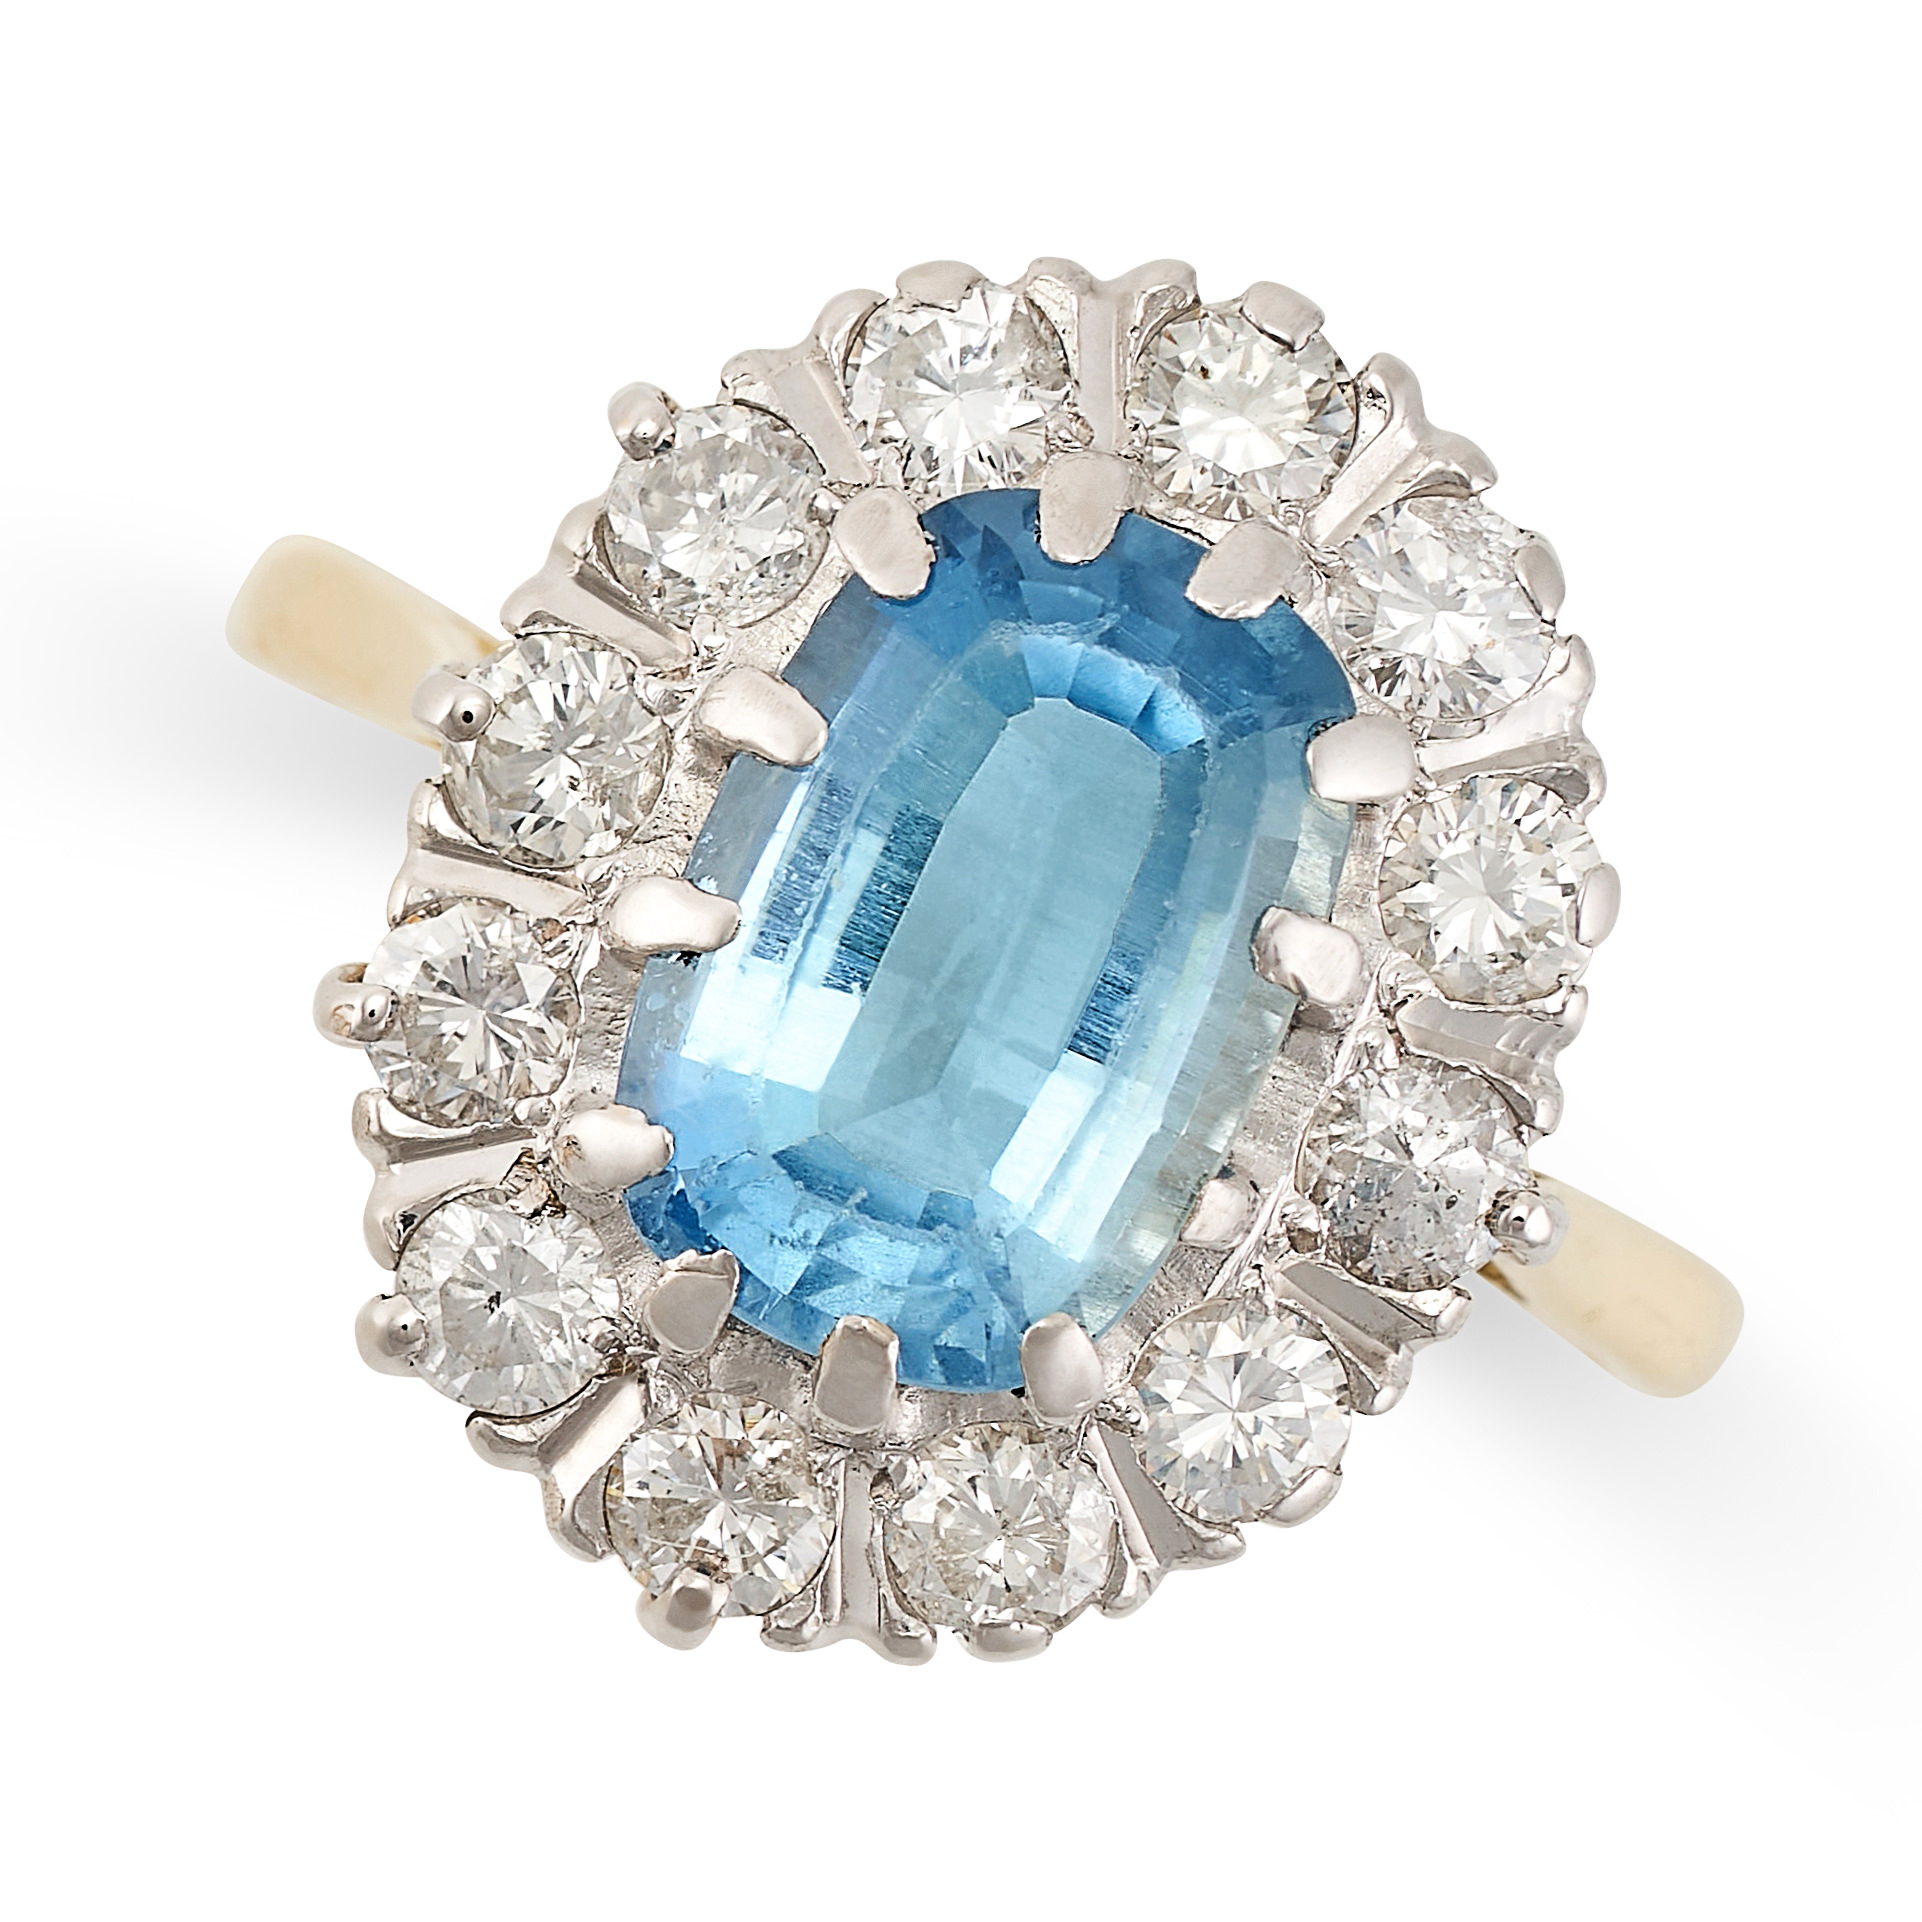 AN AQUAMARINE AND DIAMOND CLUSTER RING in 18ct yellow gold, set with a cushion cut aquamarine of 2.